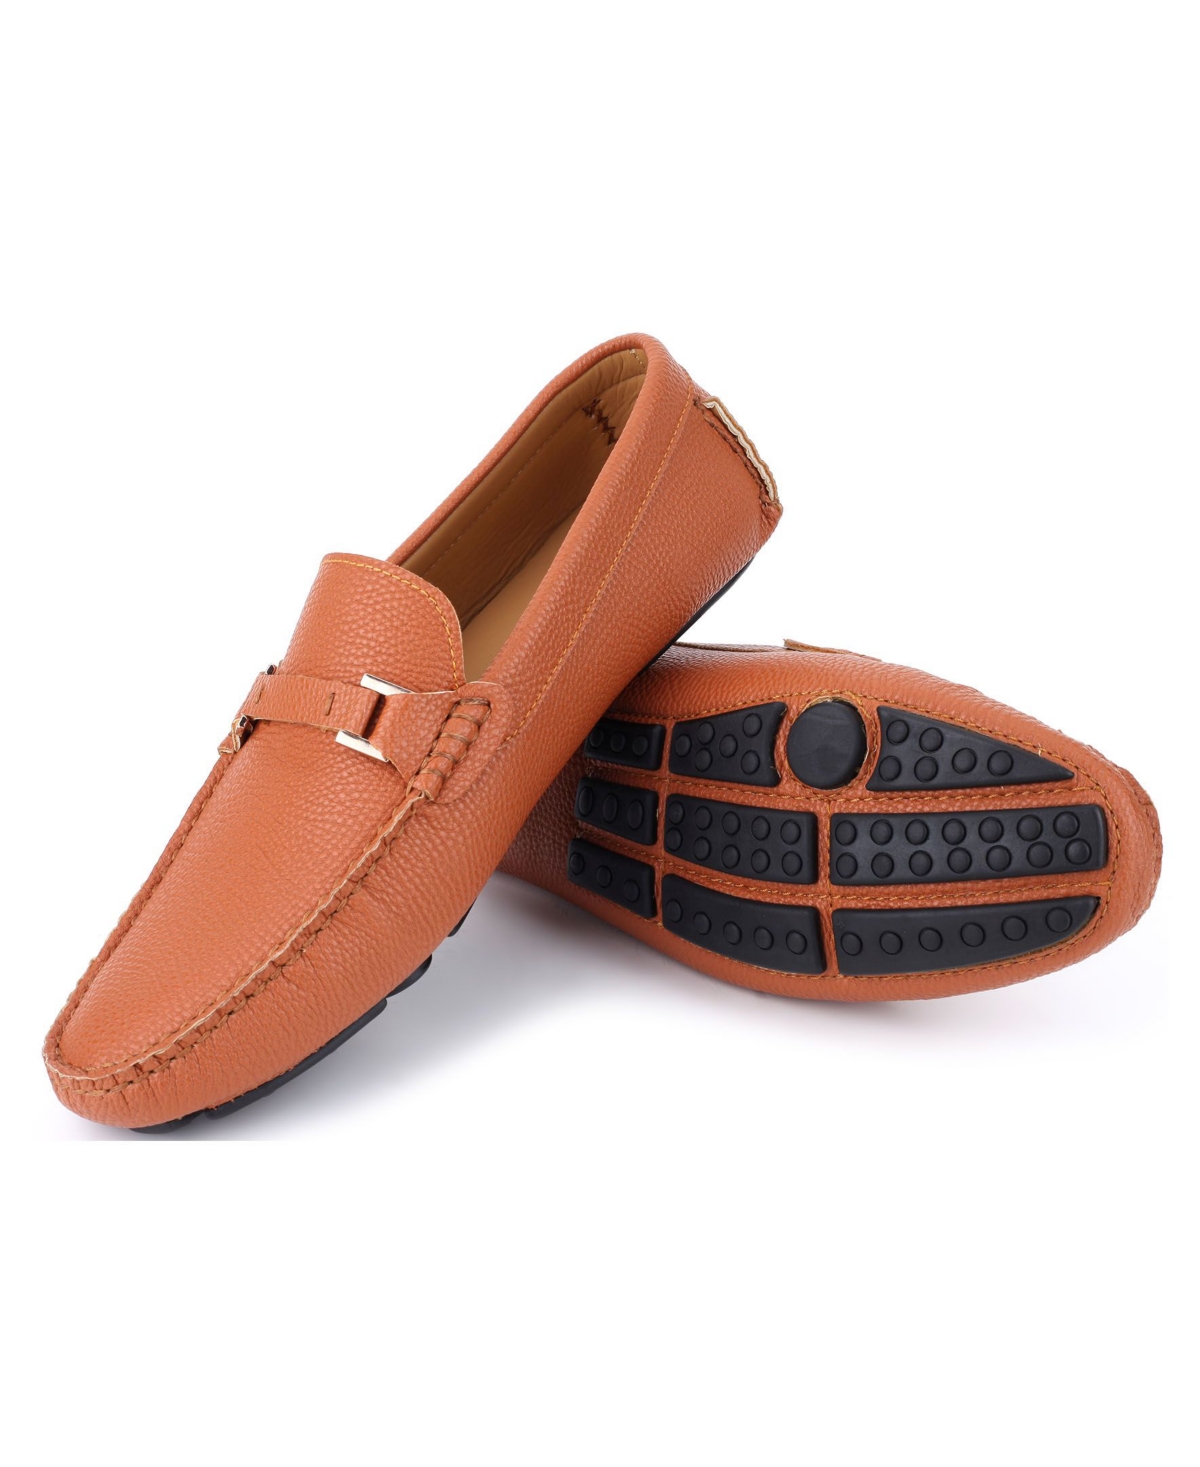 Men's Buckle Tread Casual Loafers - Saddle Umber